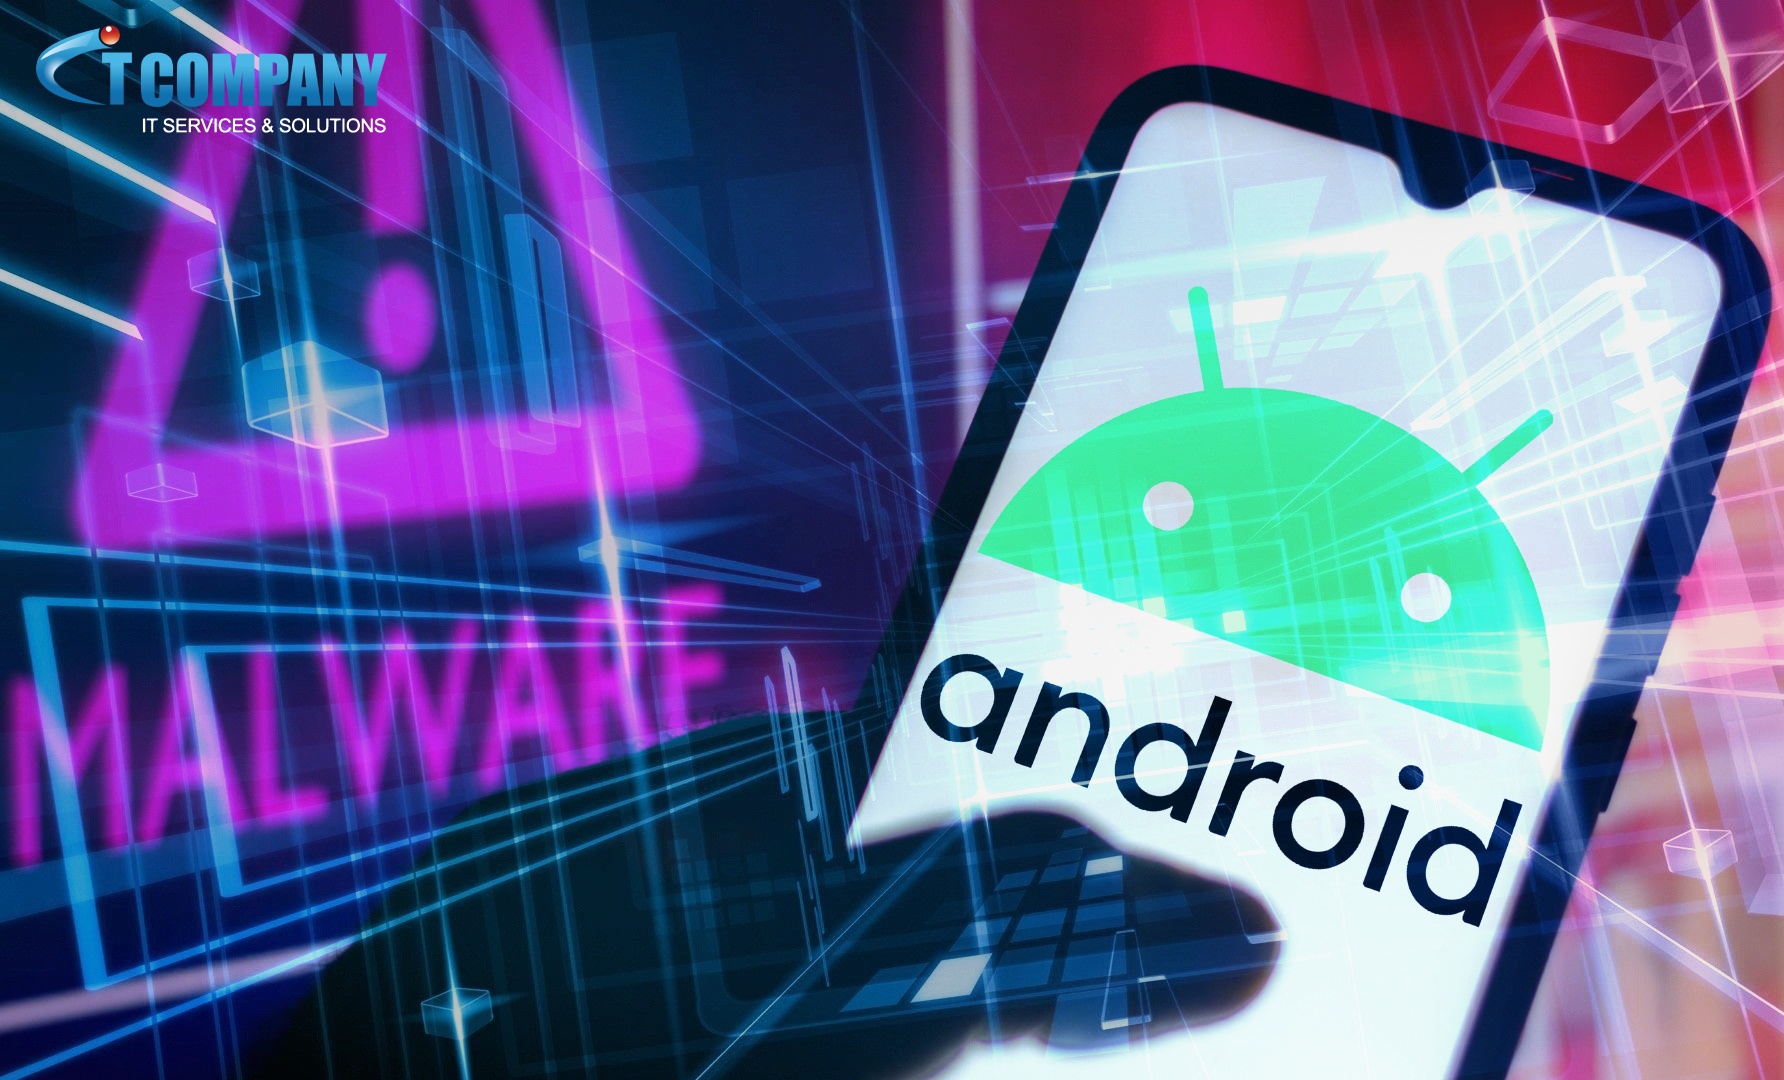 These fraudulent antivirus apps for Android install a harmful banking malware